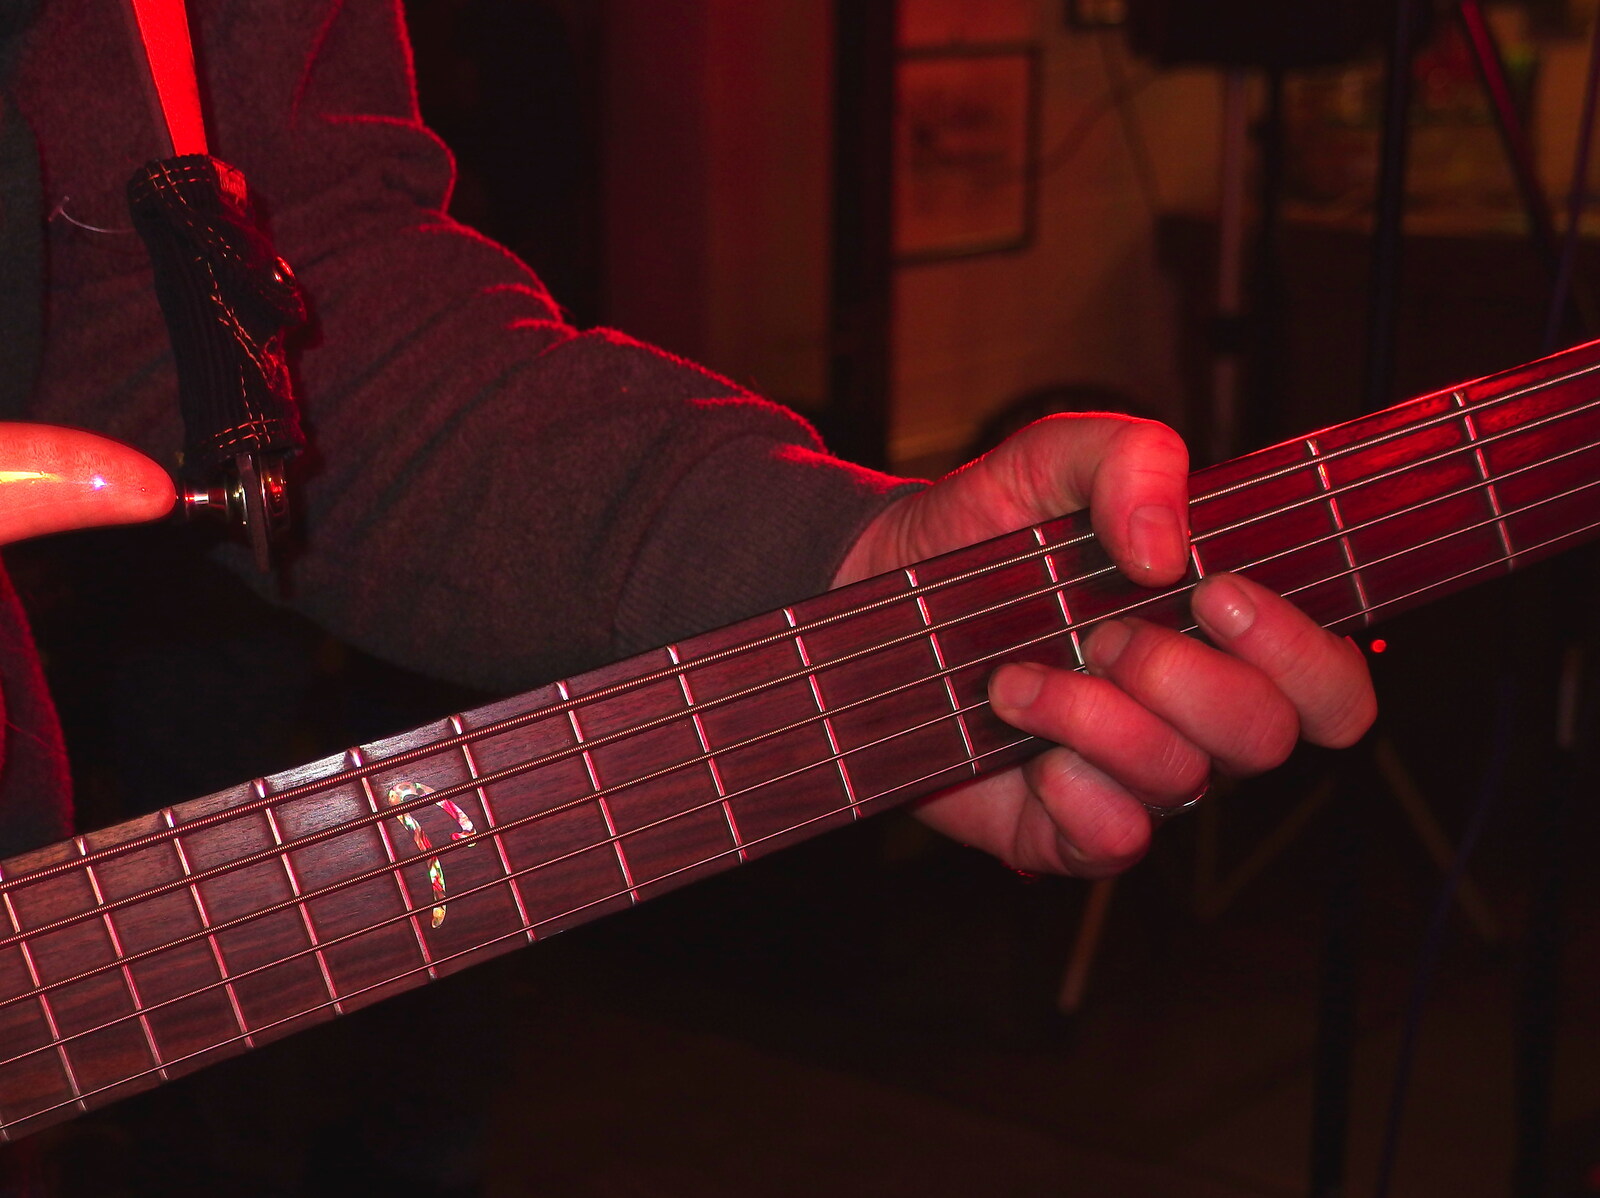 Max's Five String bass from The BBs Do New Year's Eve at the Barrel, Banham, Norfolk - 31st December 2013